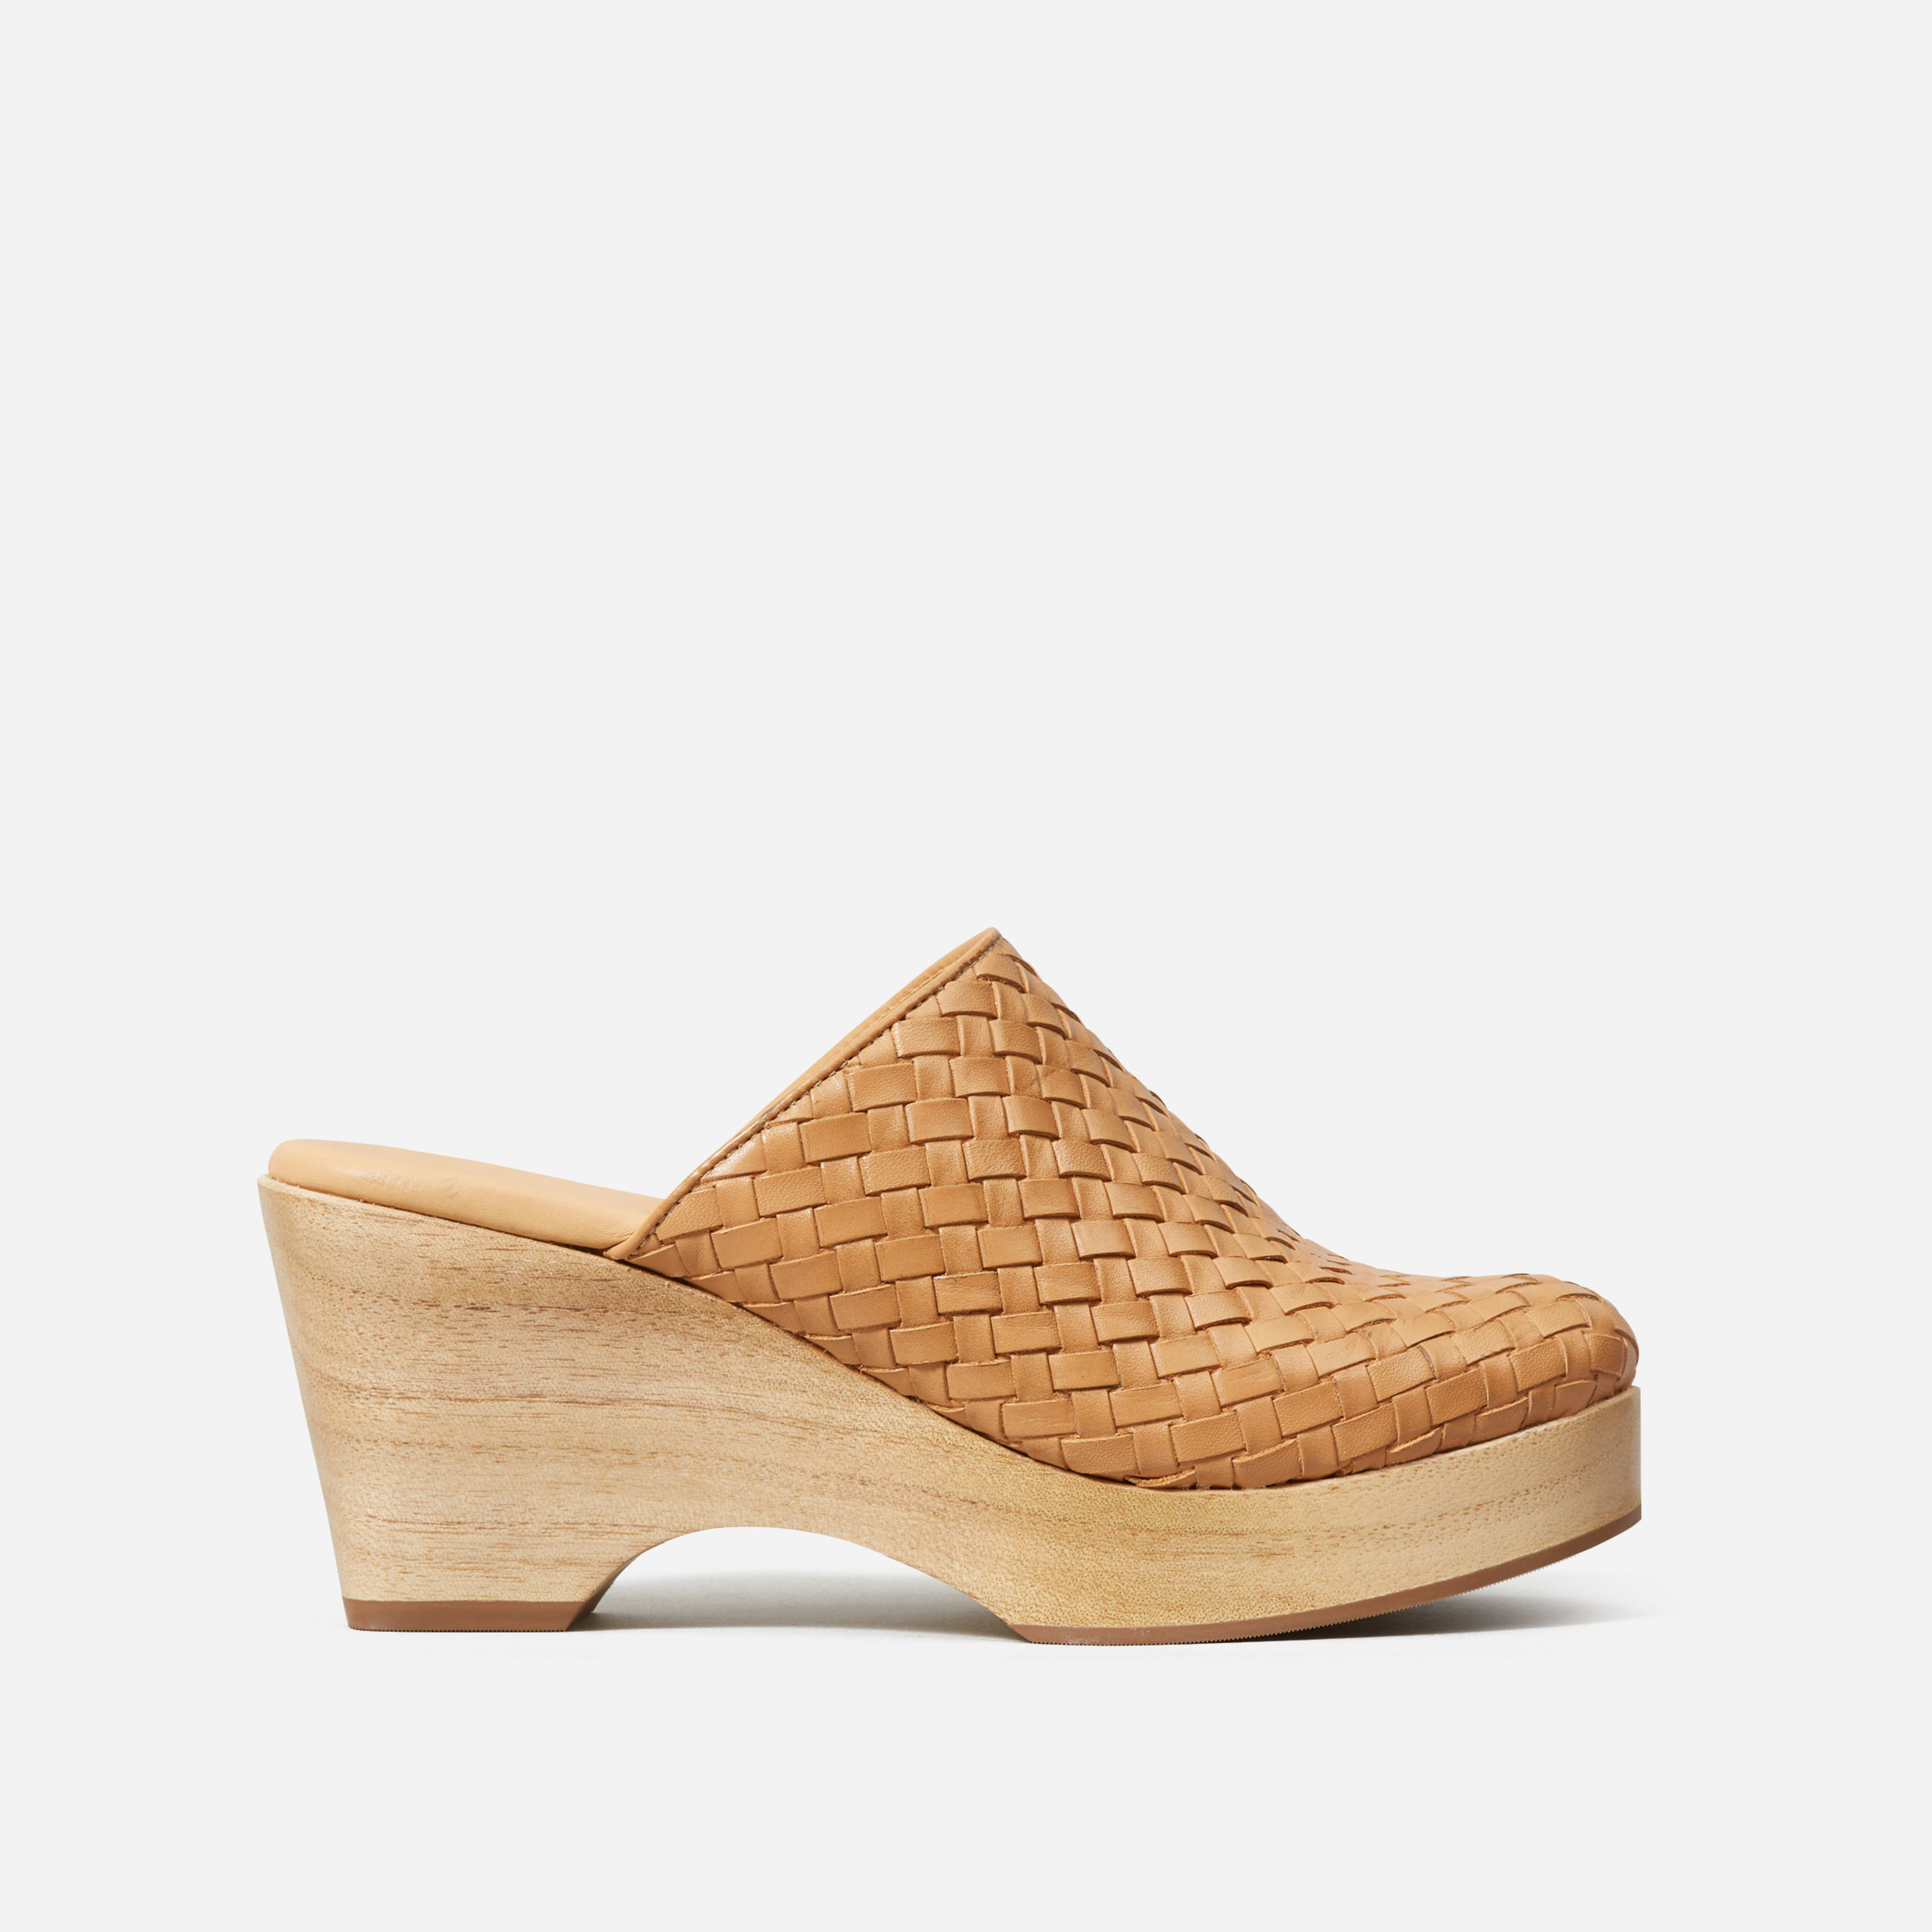 Clog by Everlane in Tan Woven, Size 5.5